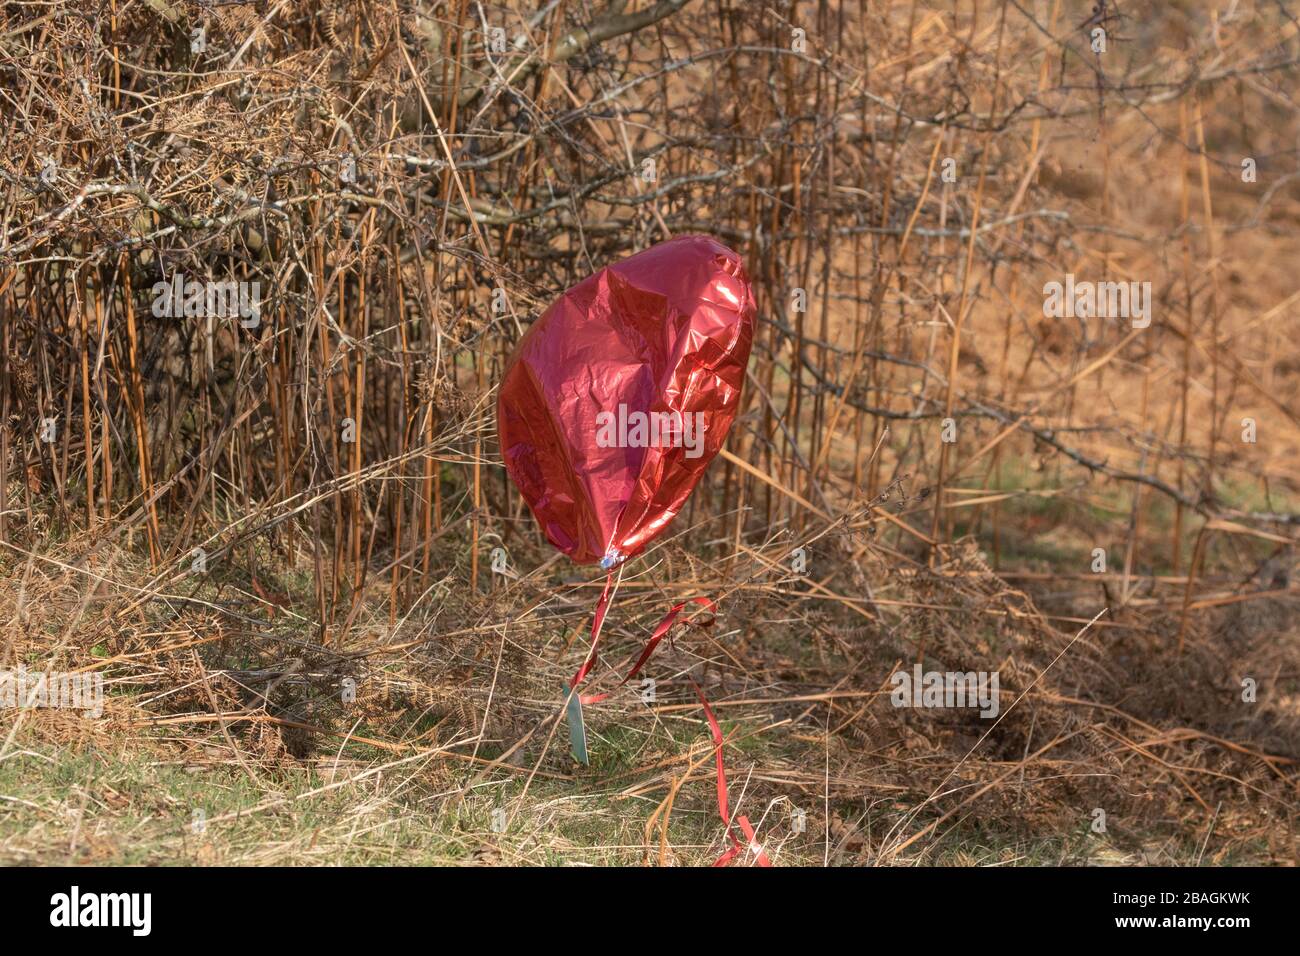 A red foil balloon pollutes the environment. Stock Photo